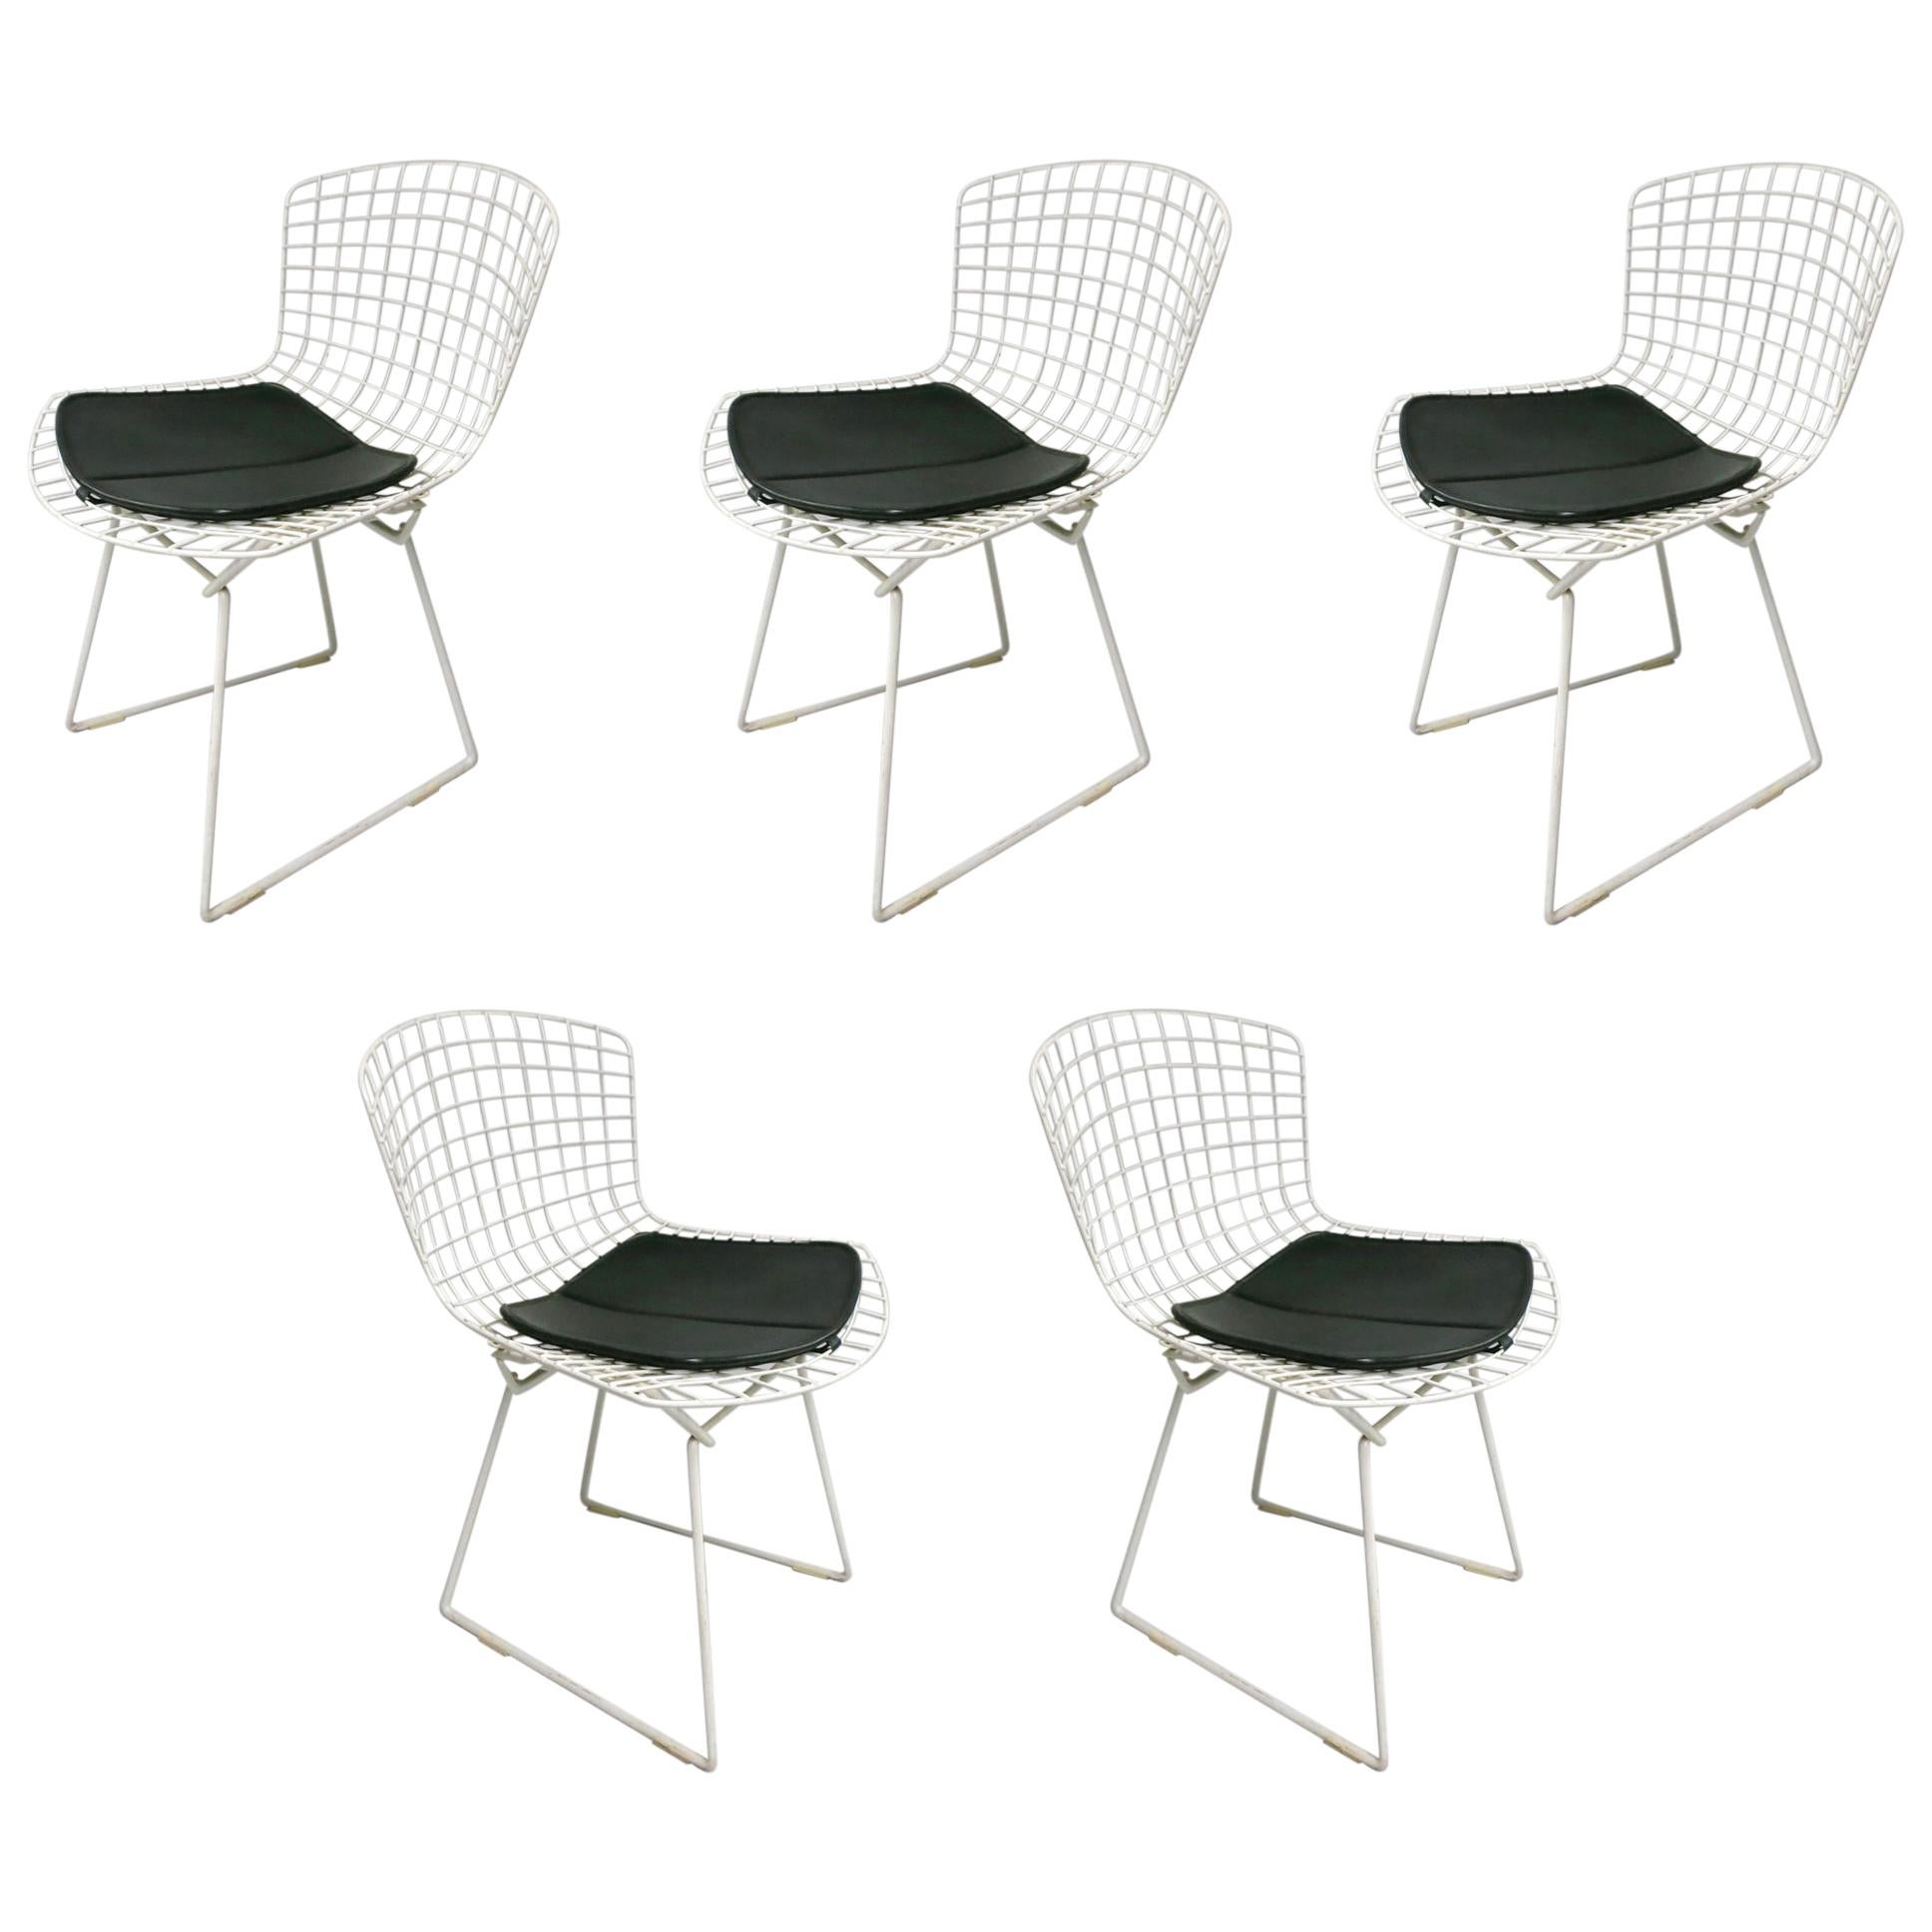 5 Chairs by Harry Bertoia for Knoll, circa 1975